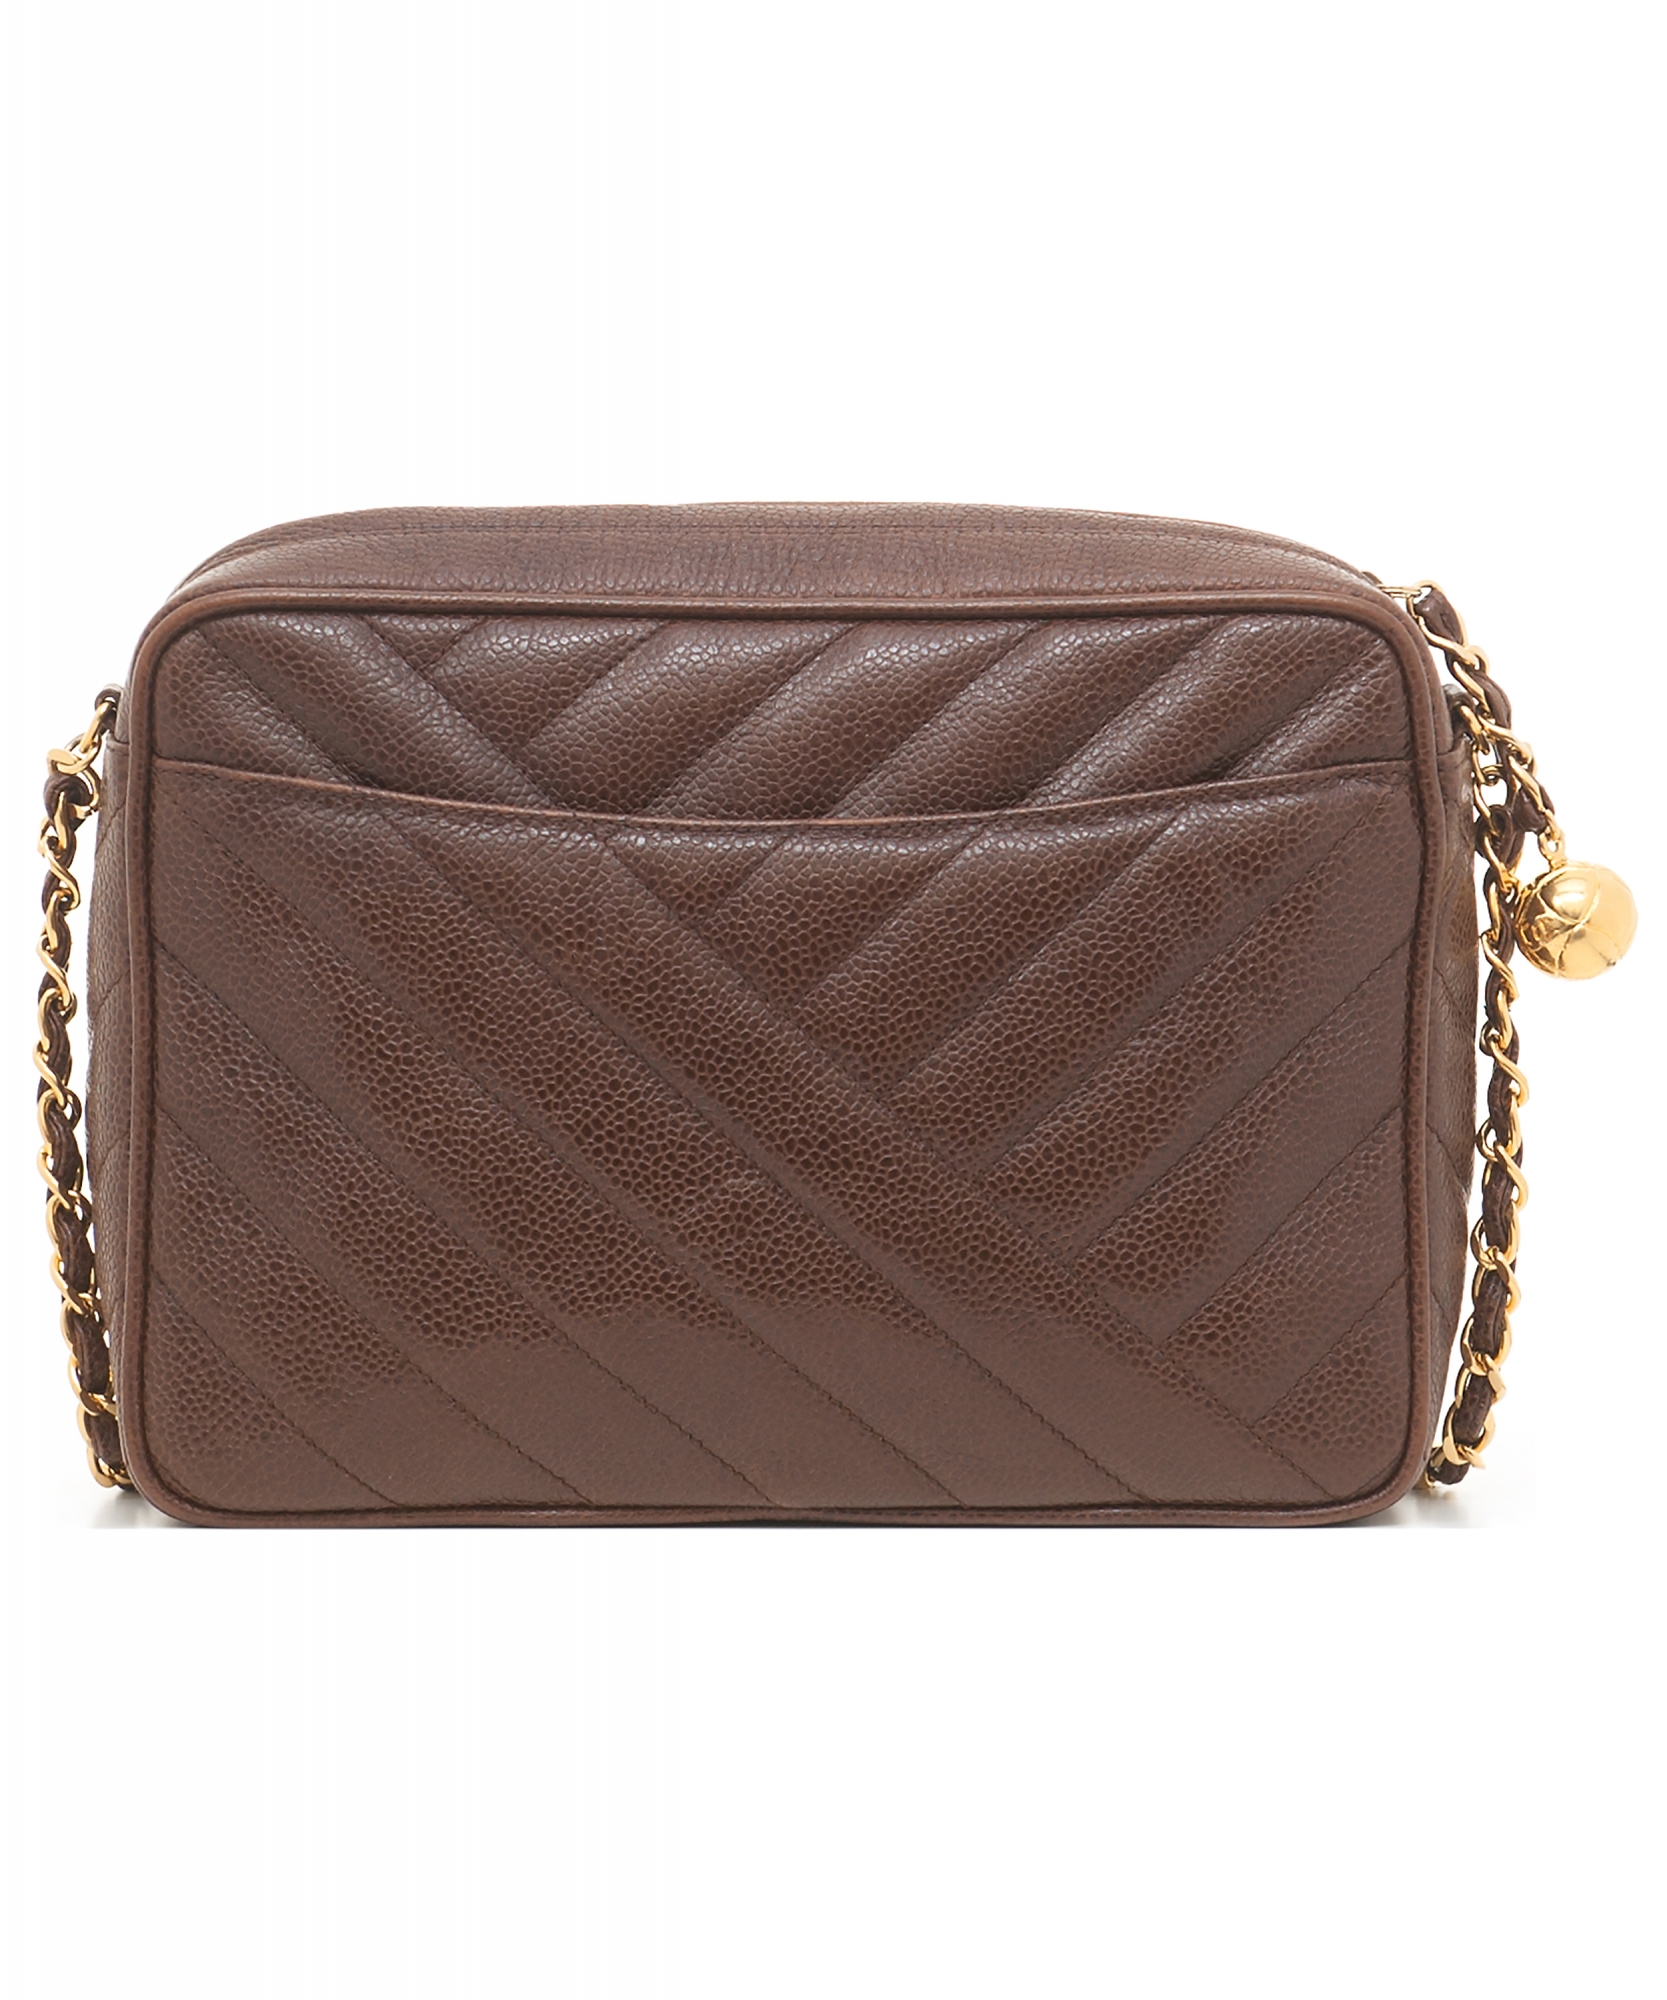 Chanel Brown Caviar Chevron Quilted Camera Bag - Chanel | ArtListings